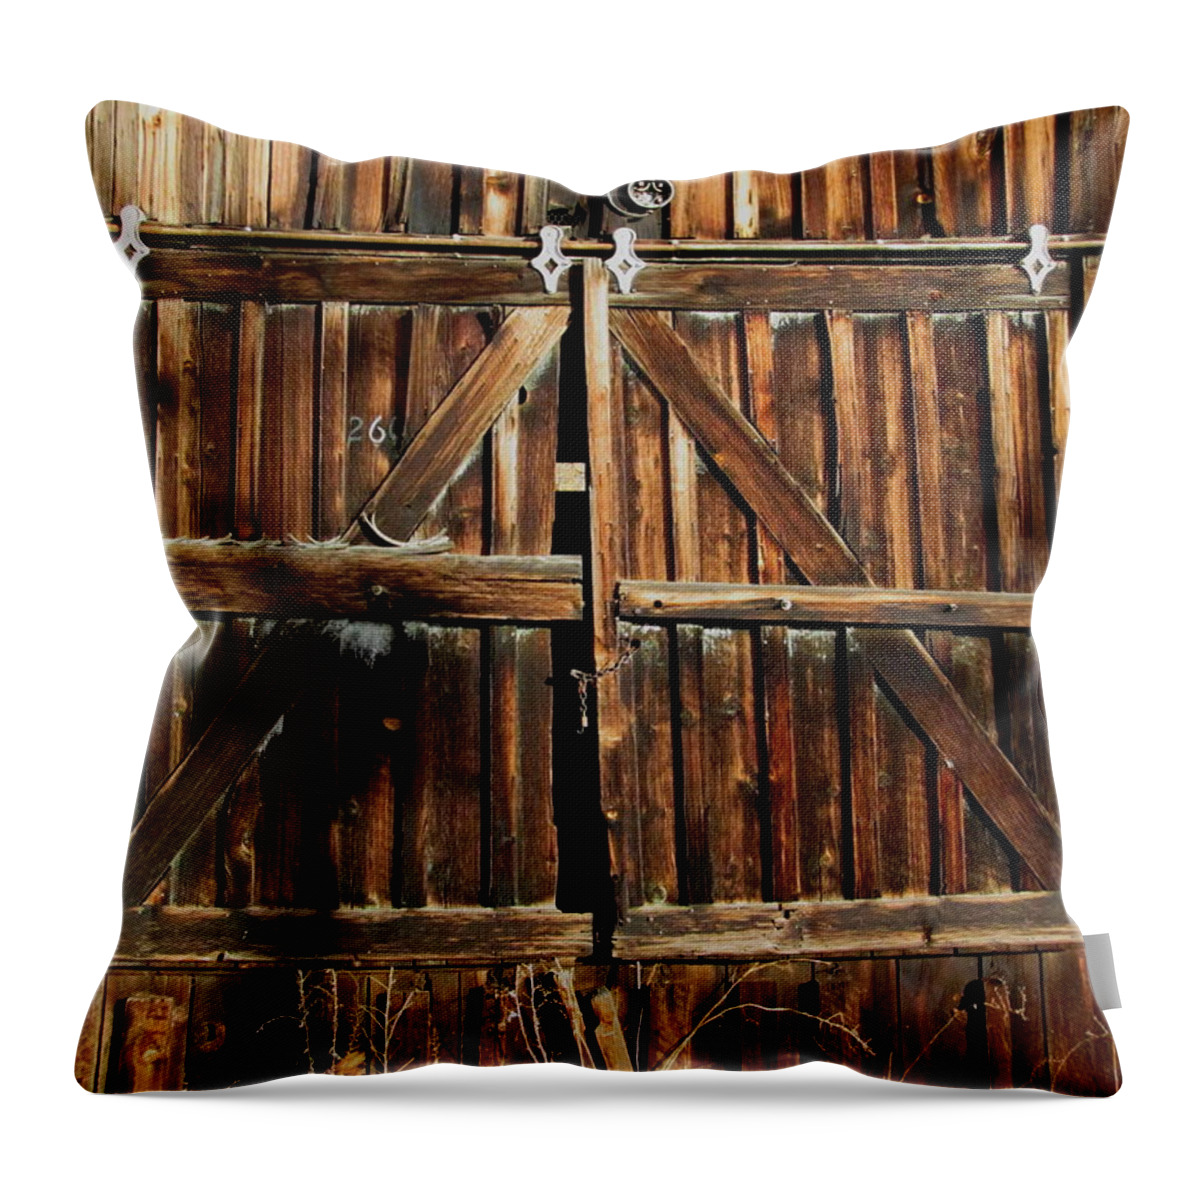 Barn Throw Pillow featuring the photograph Old Cedarville Barn #3 by Dreamweaver Gallery